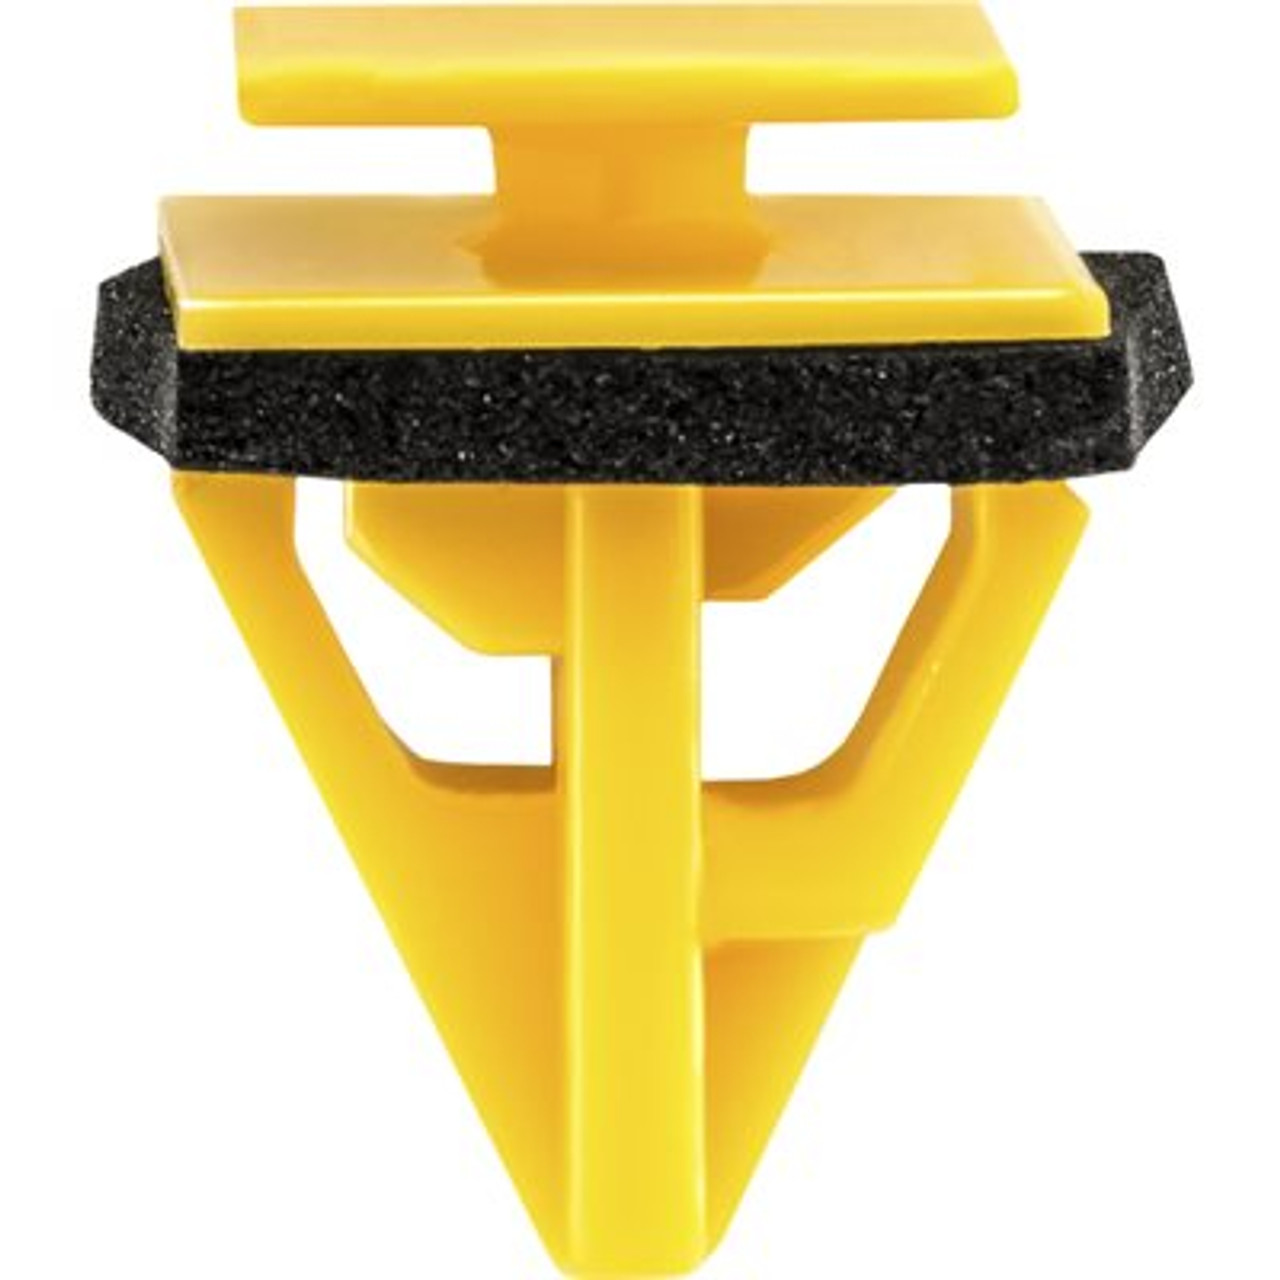 Description : Trunk Side Trim Moulding Clip with Sealer
Material : Nylon
Color : Yellow
Type : Moulding Clip with Sealer
Stem Diameter : 14.5MM
Stem Length : 9MM
Top Head Size : 12MM x 12MM
Bottom Head Size : 14MM x 18MM
Includes : Sealer
OEM Number : 877563N100
Pcs/Unit: 15
Country: CN
Catalog Page #: 719